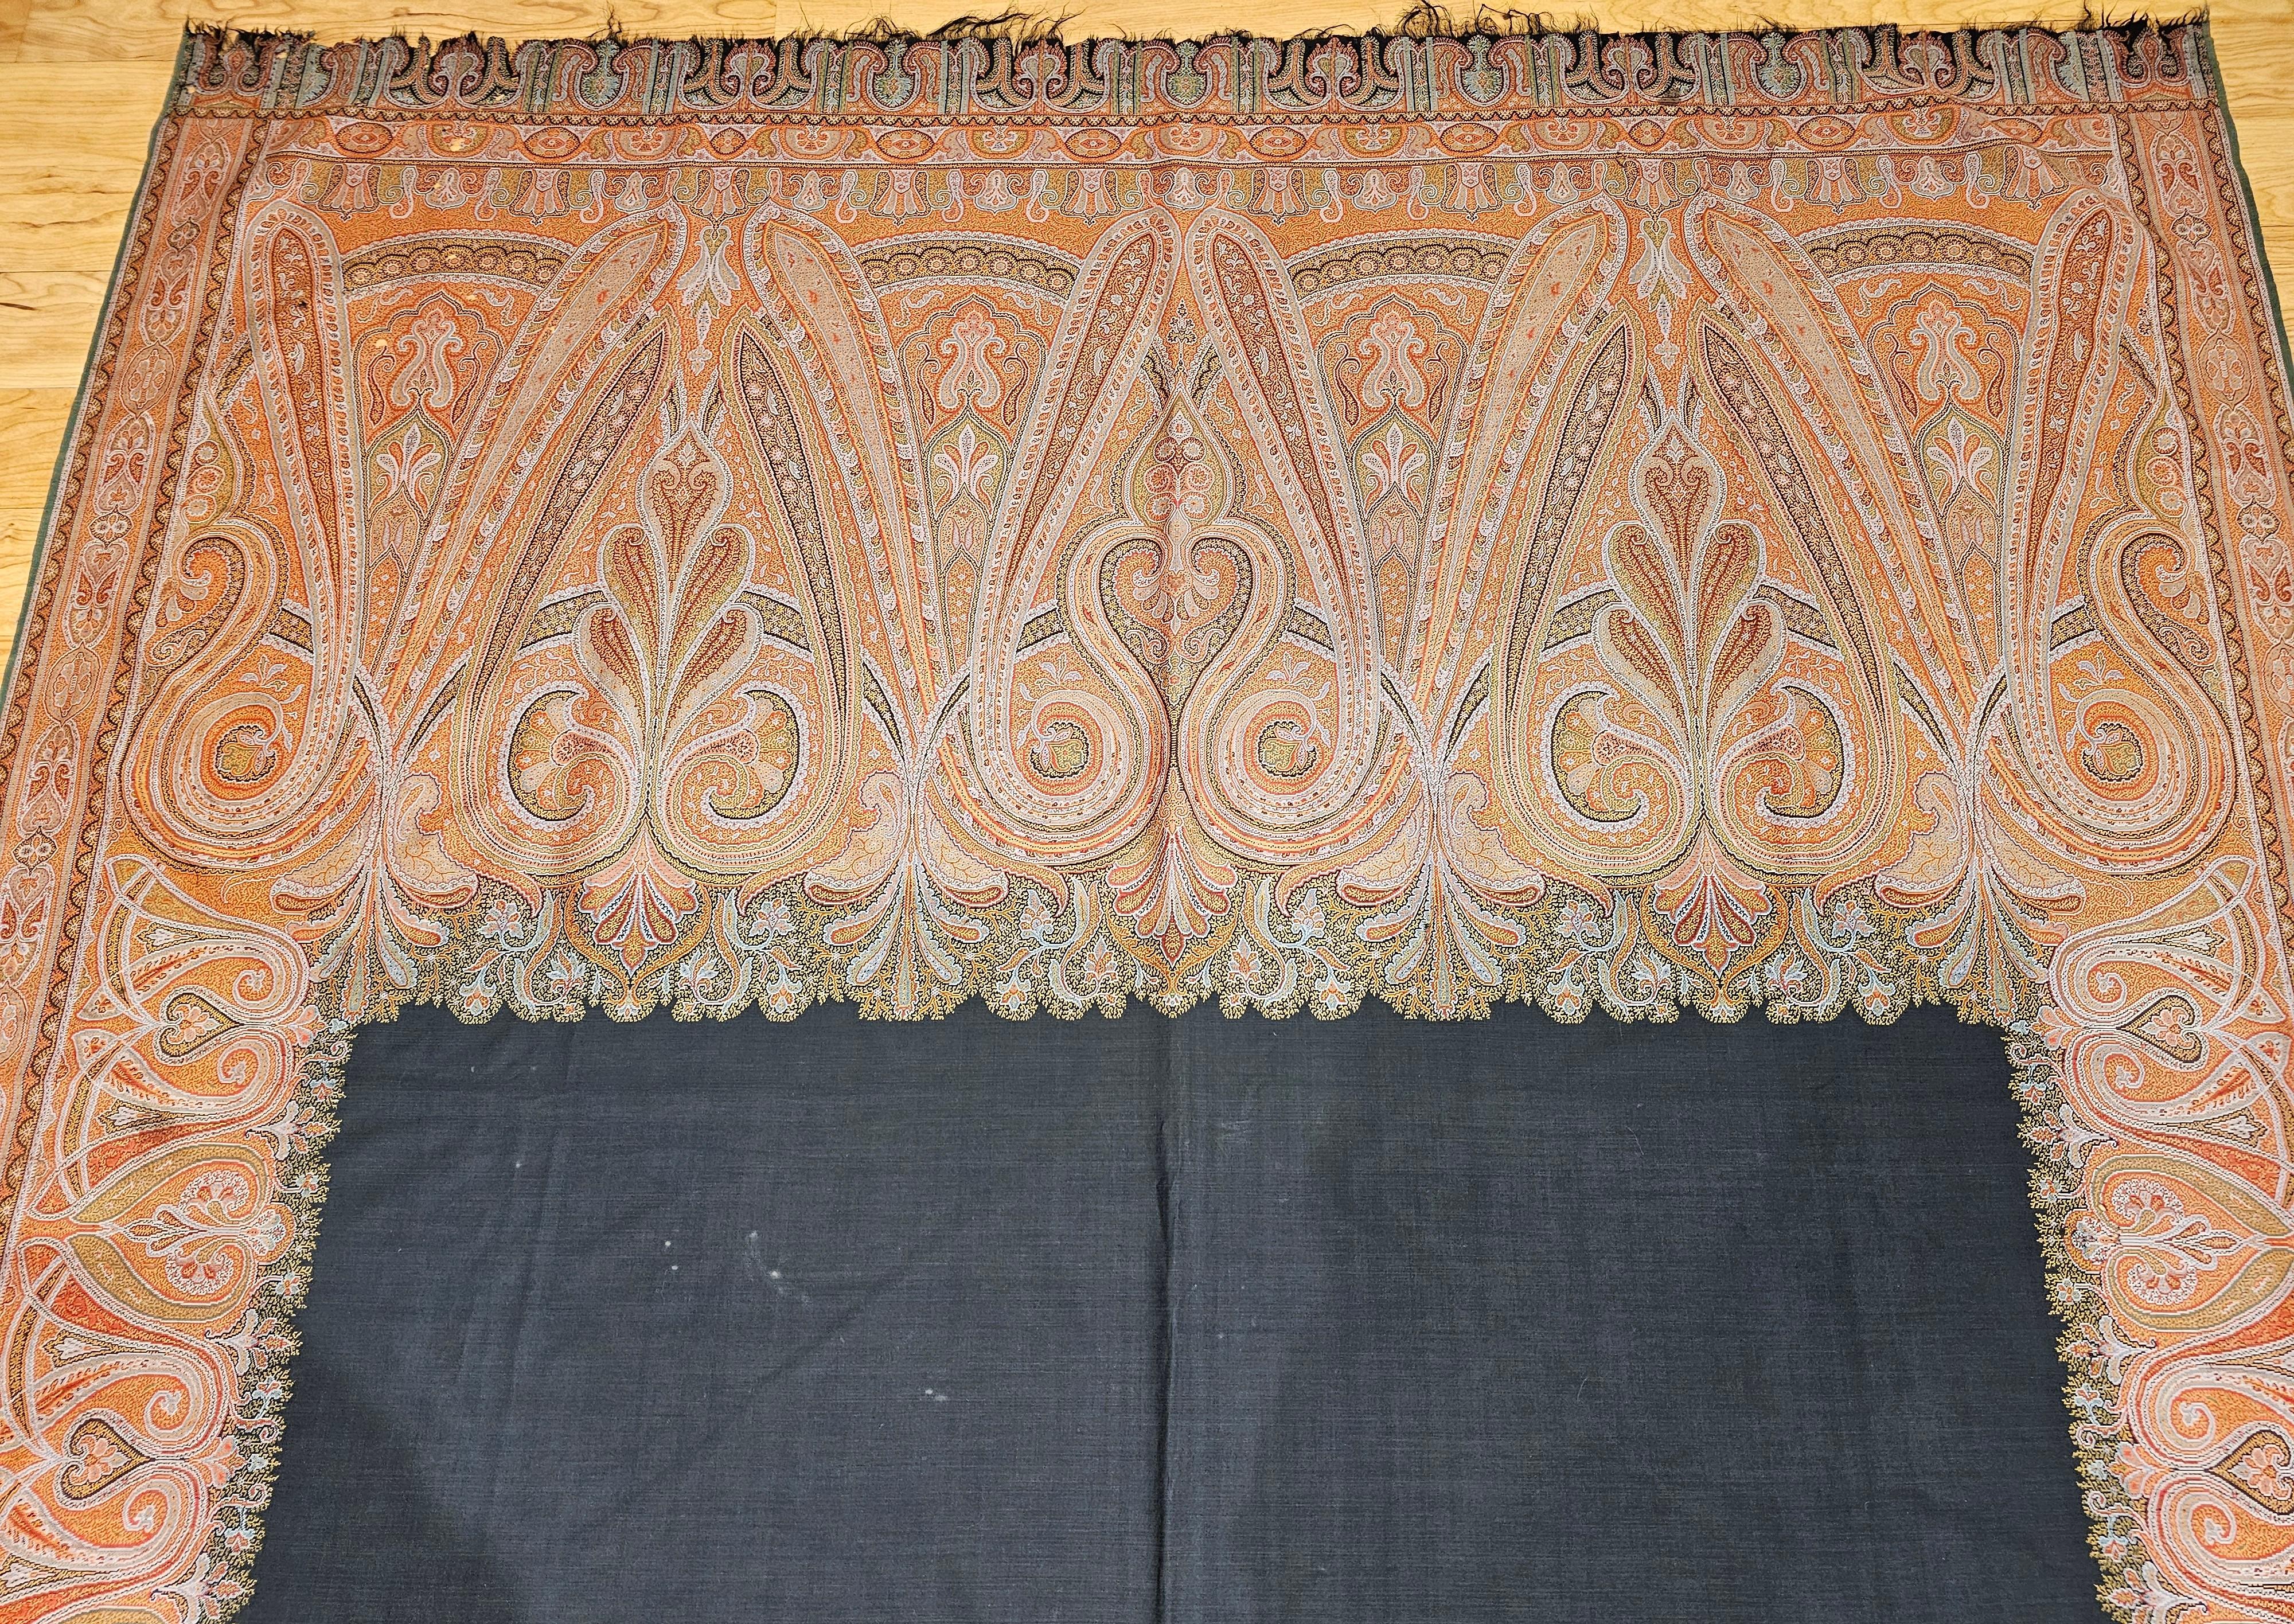 19th Century Hand-Woven Kashmiri Paisley Shawl in Brick Red, Black, Green In Good Condition For Sale In Barrington, IL